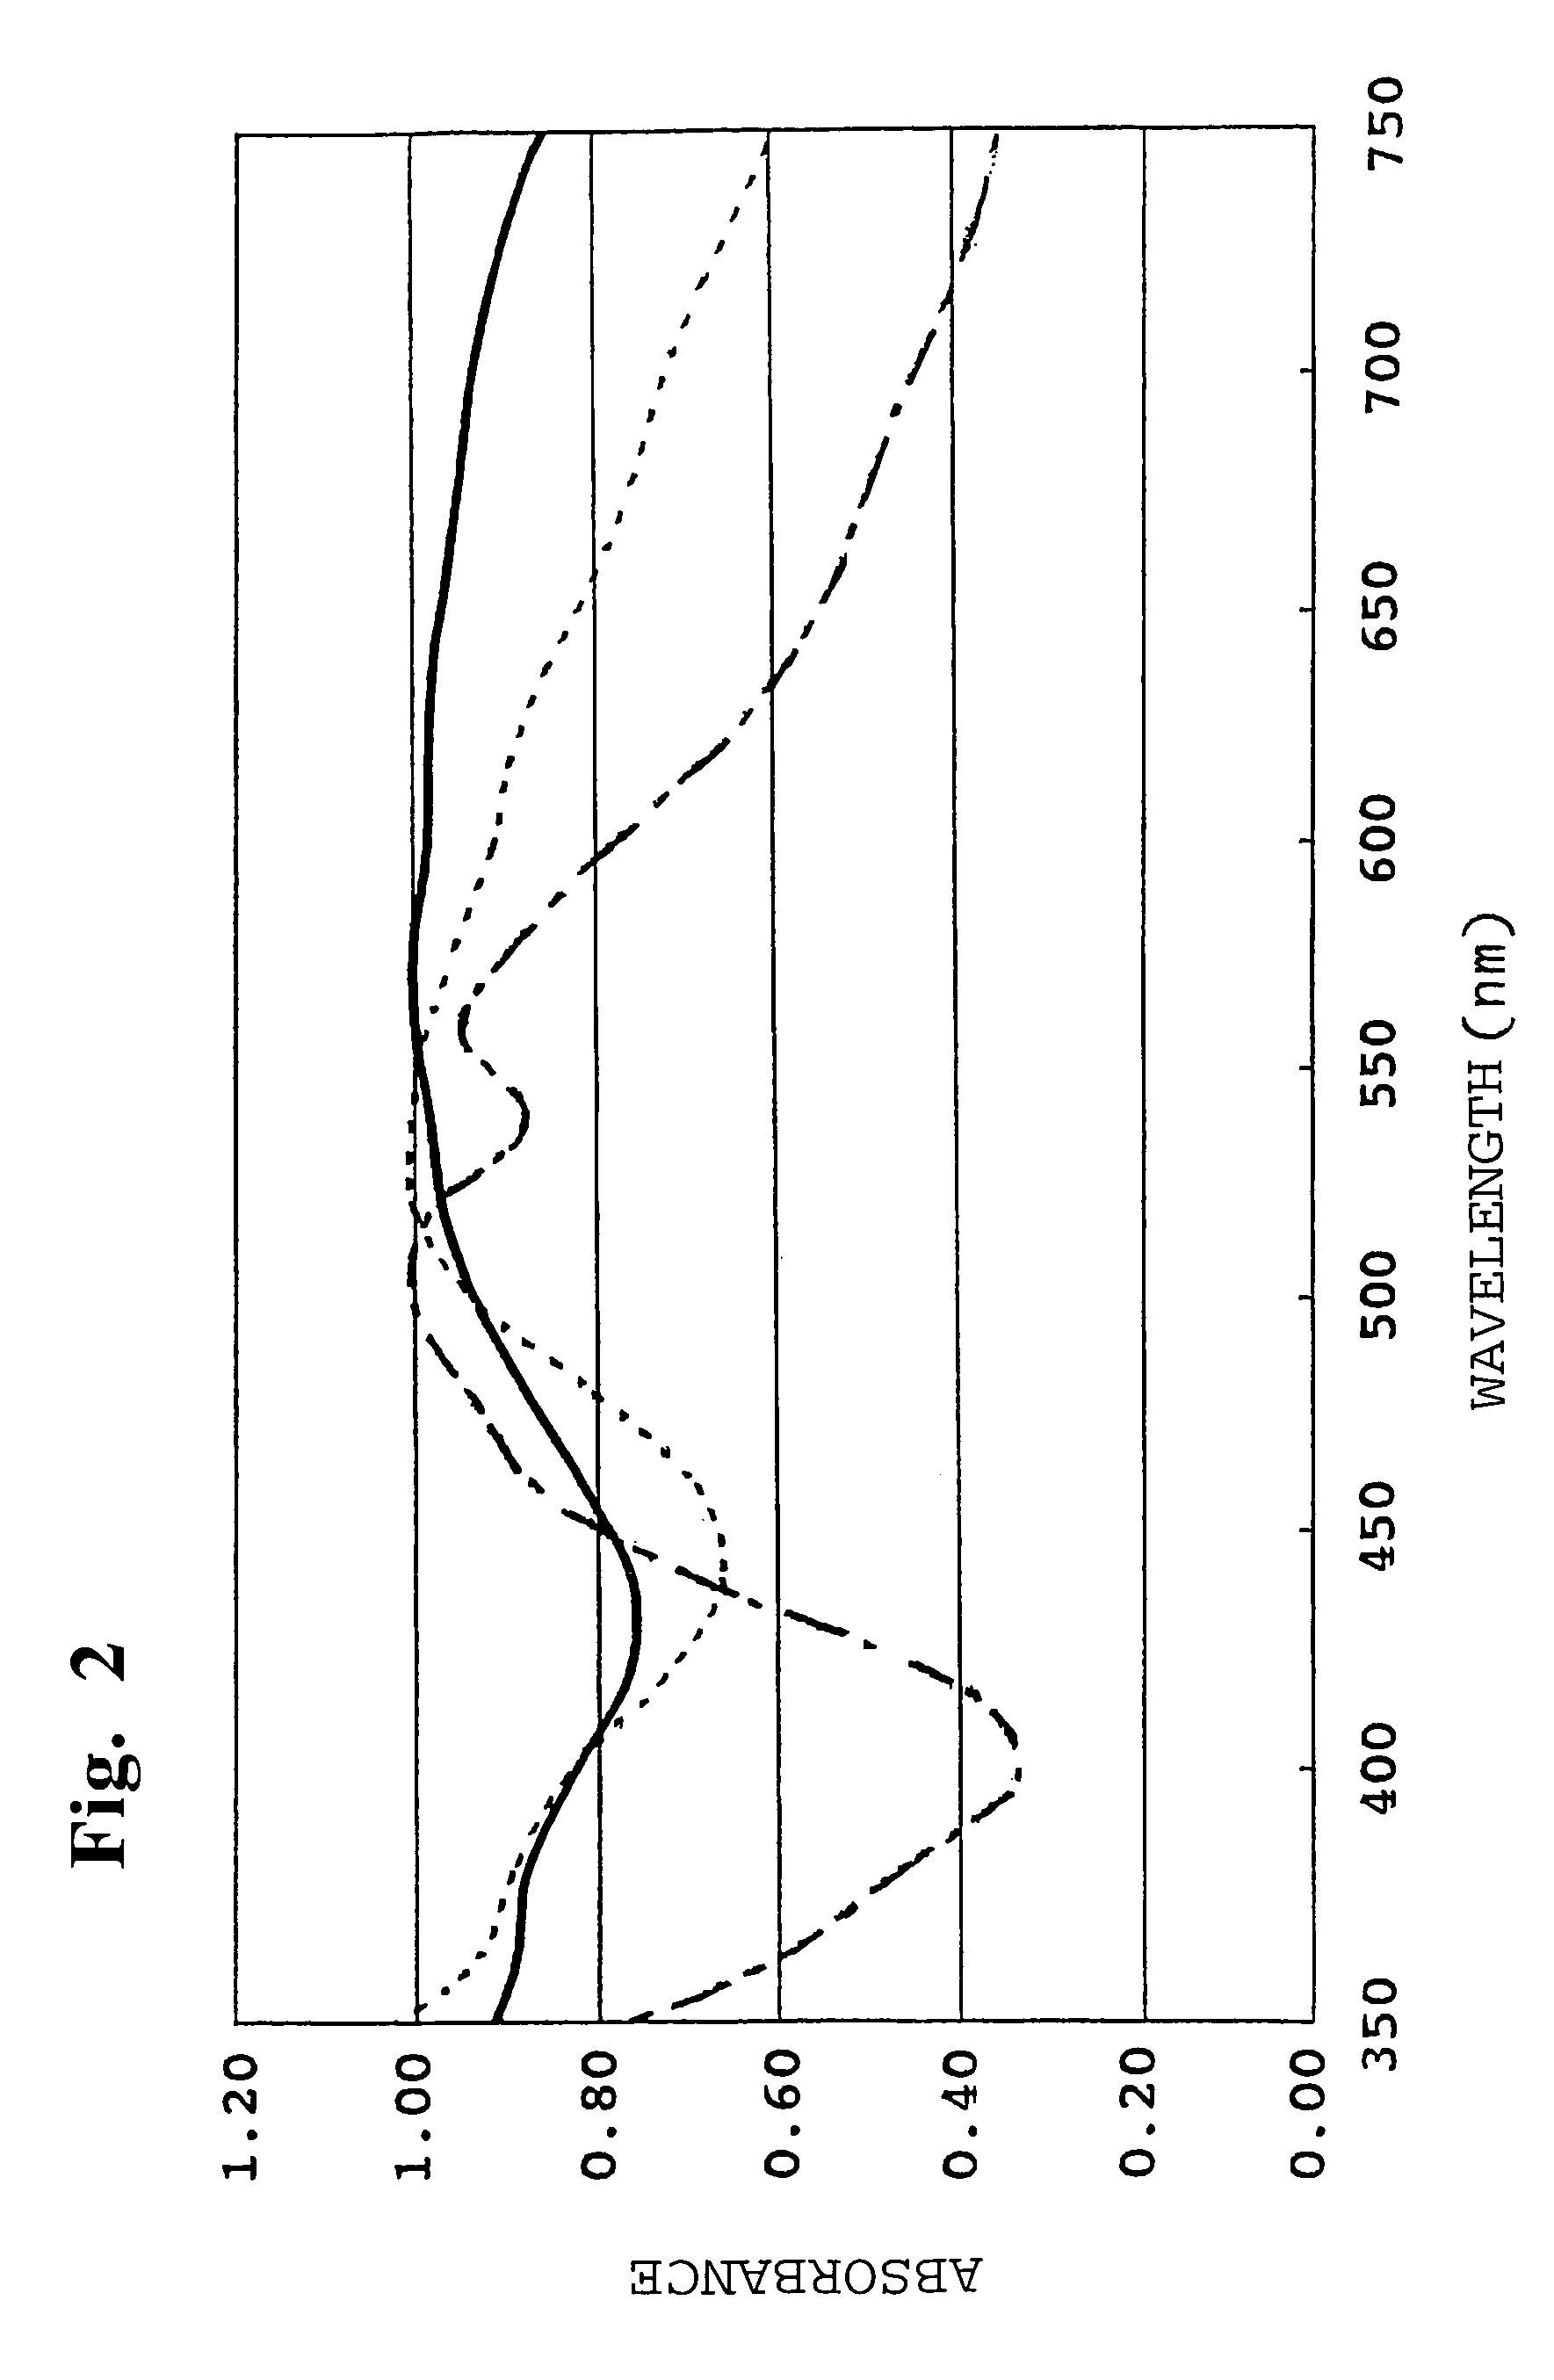 Black perylene-based pigment and process for producing the same